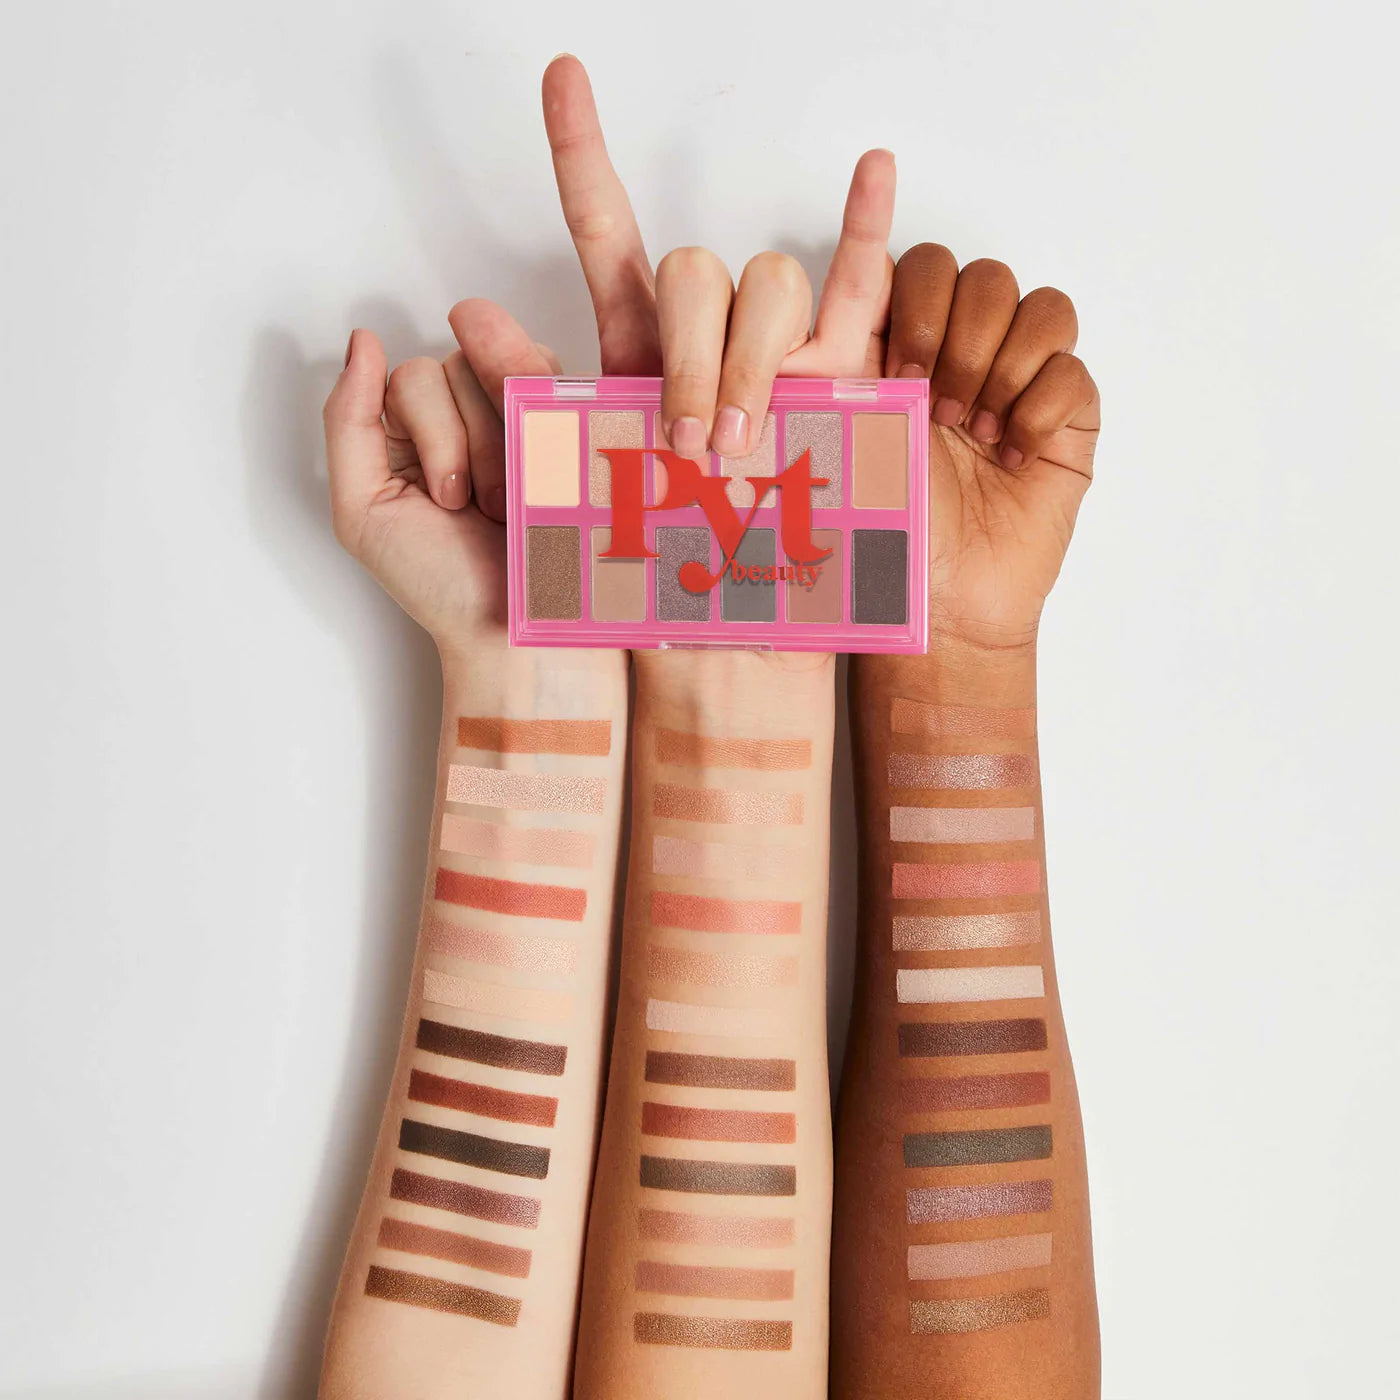 PYT Beauty - The Upcycle Palette Cool Crew Nude